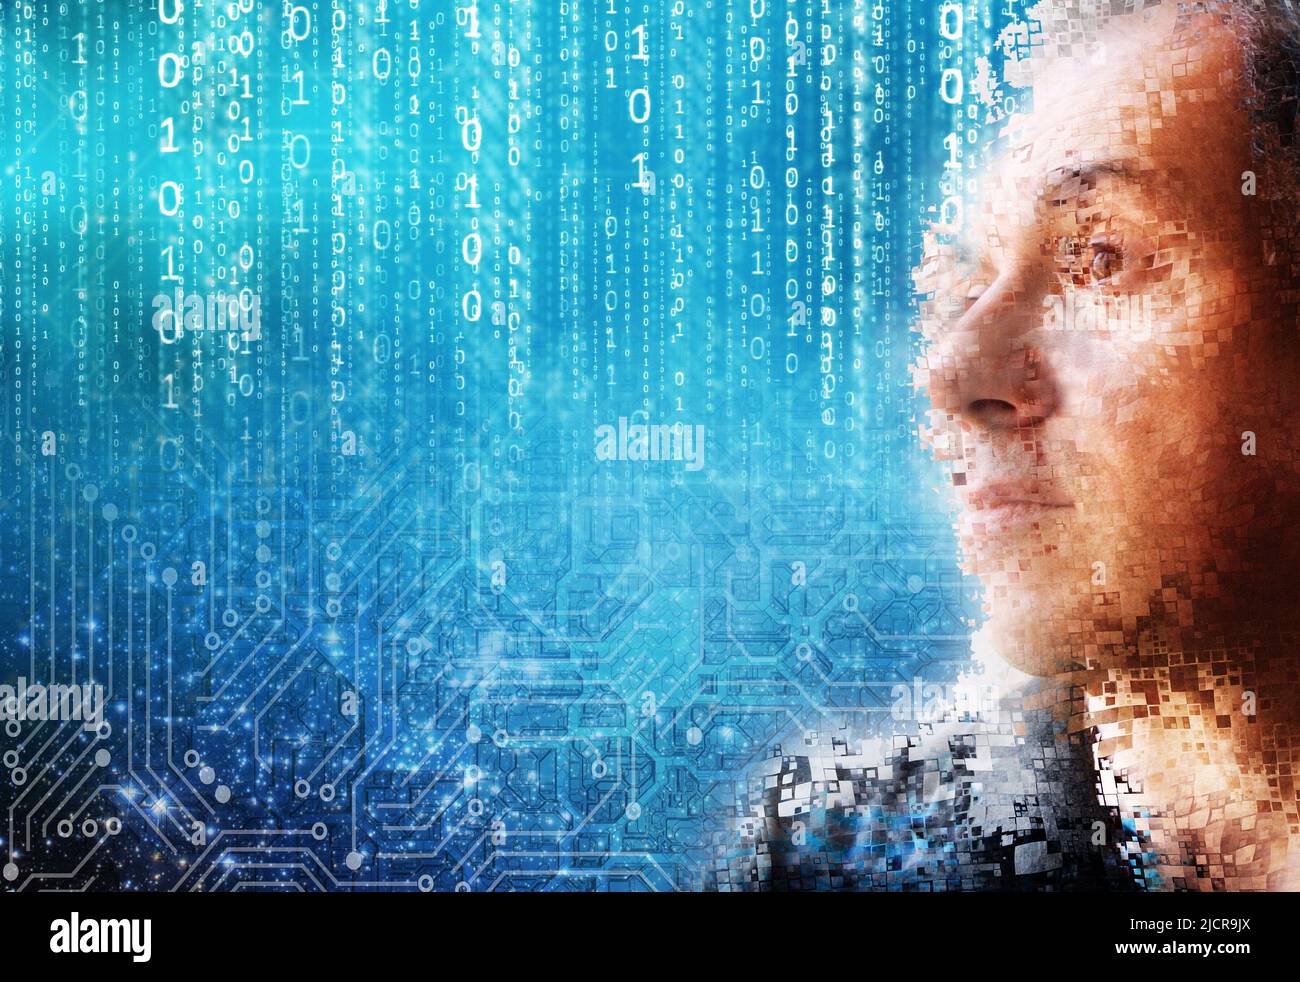 man defragmented and binary code, metaverse concept Stock Photo